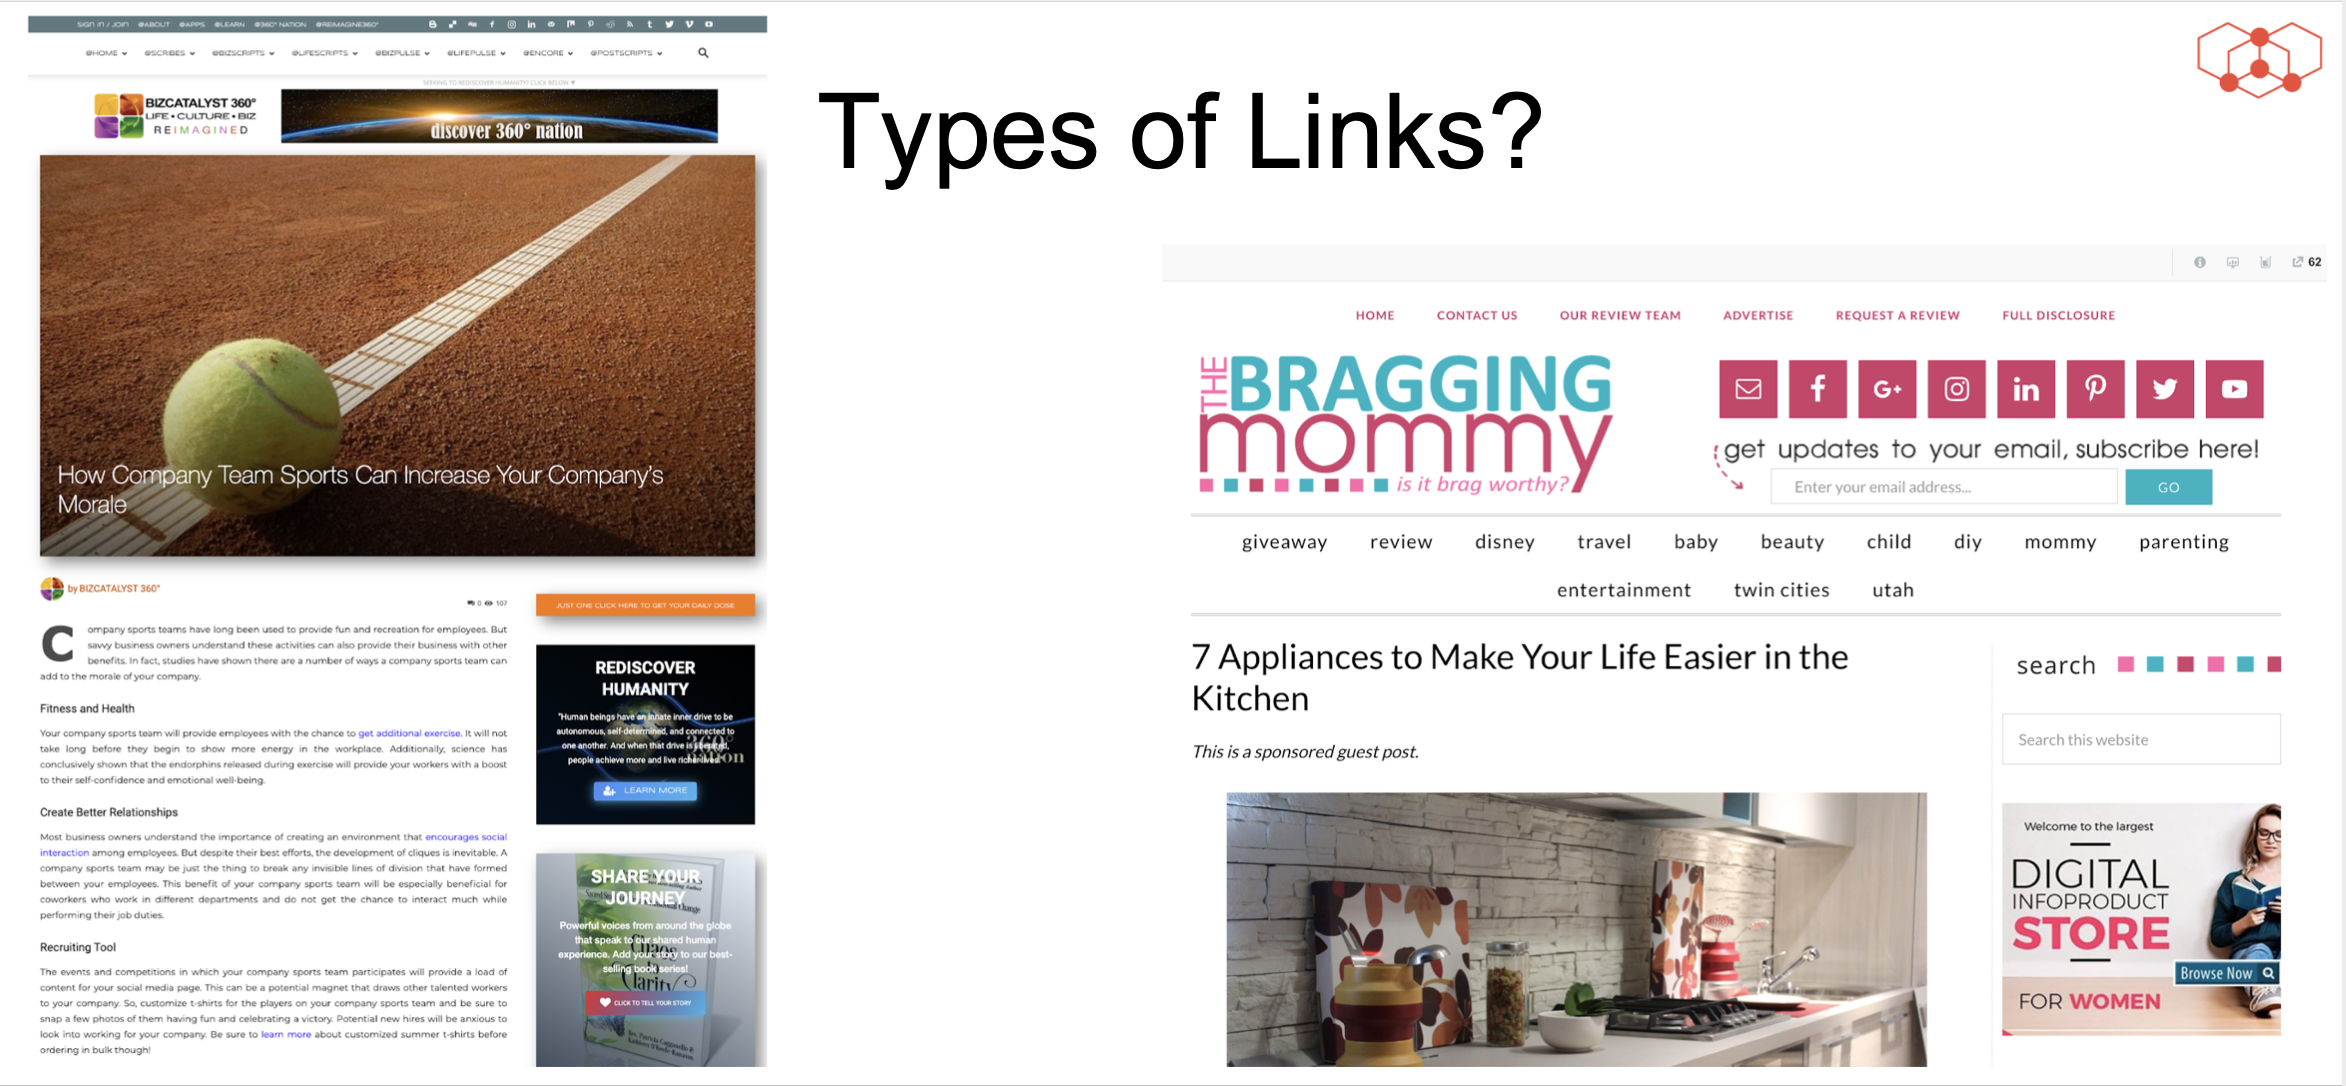 How We Built 600+ Links in 30 Days & You Can, Too